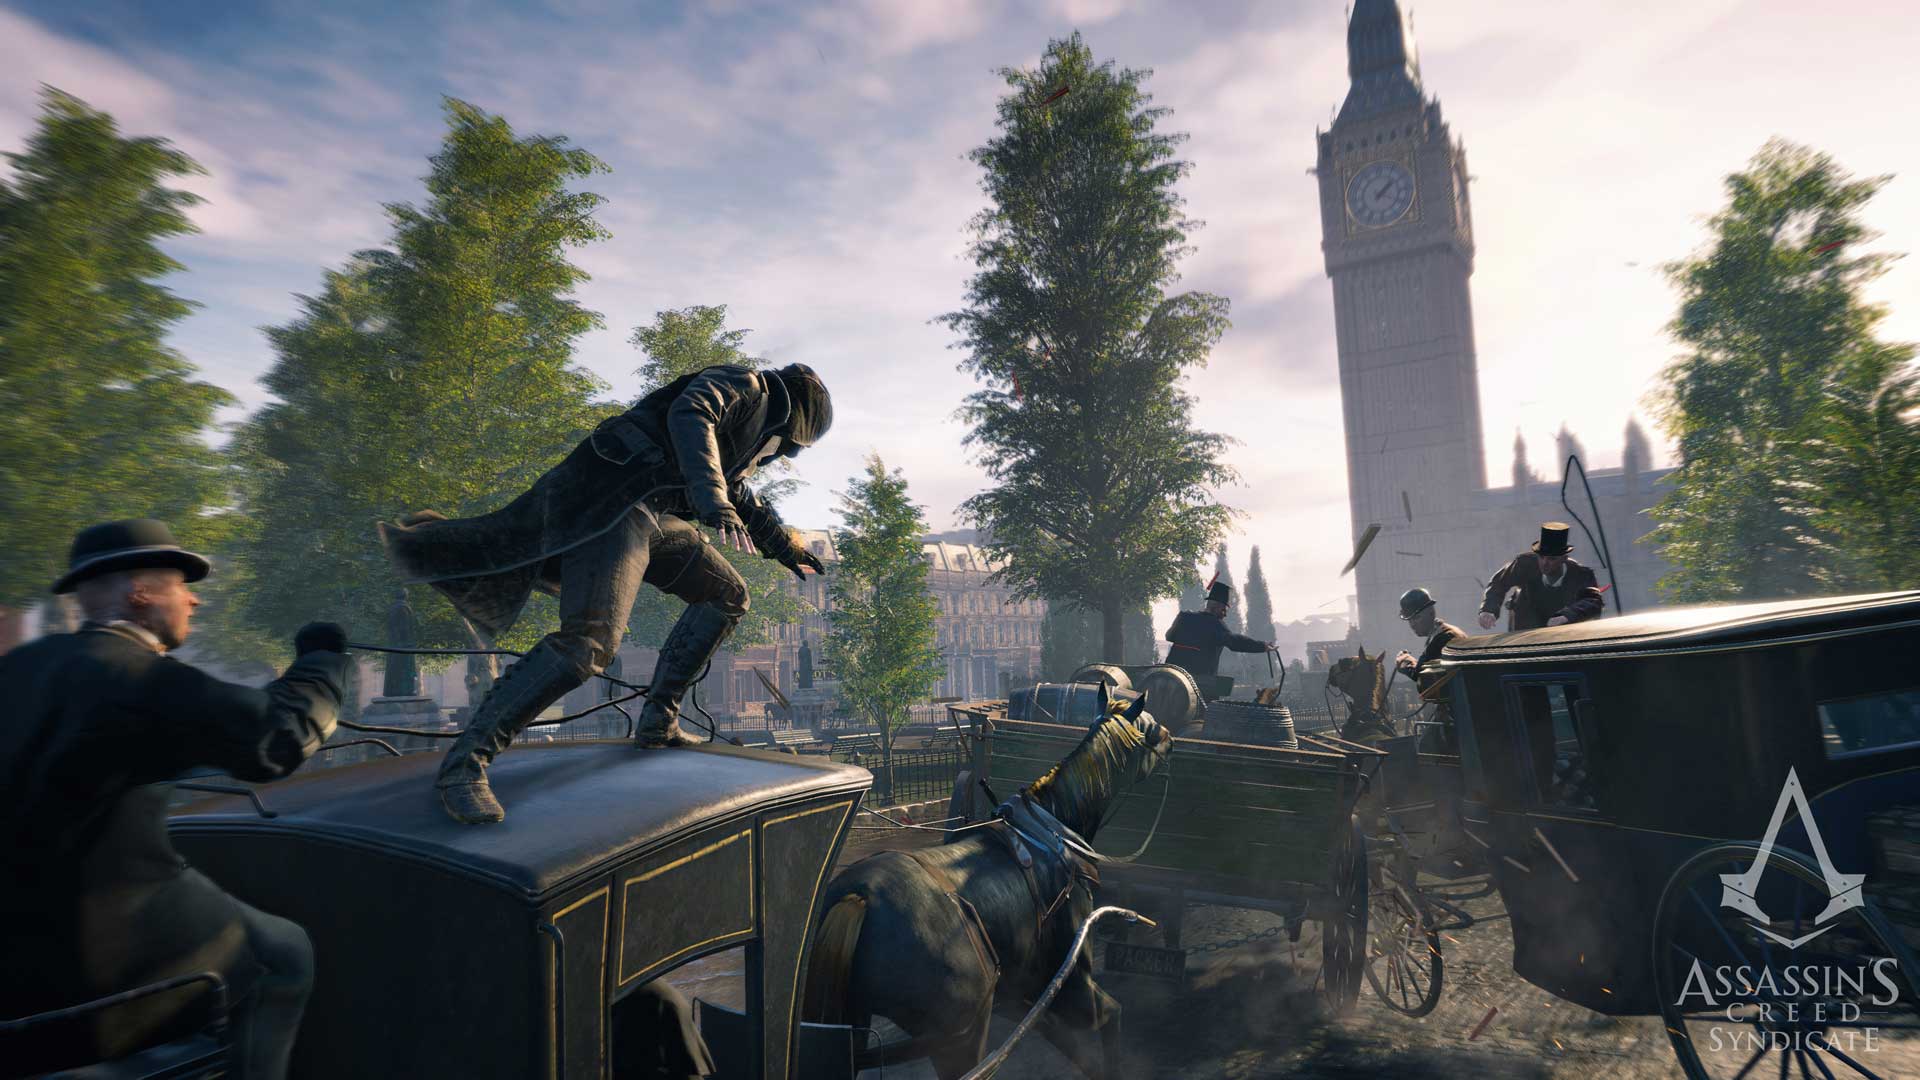 Assassin’s Creed Syndicate Officially Announced By Ubisoft